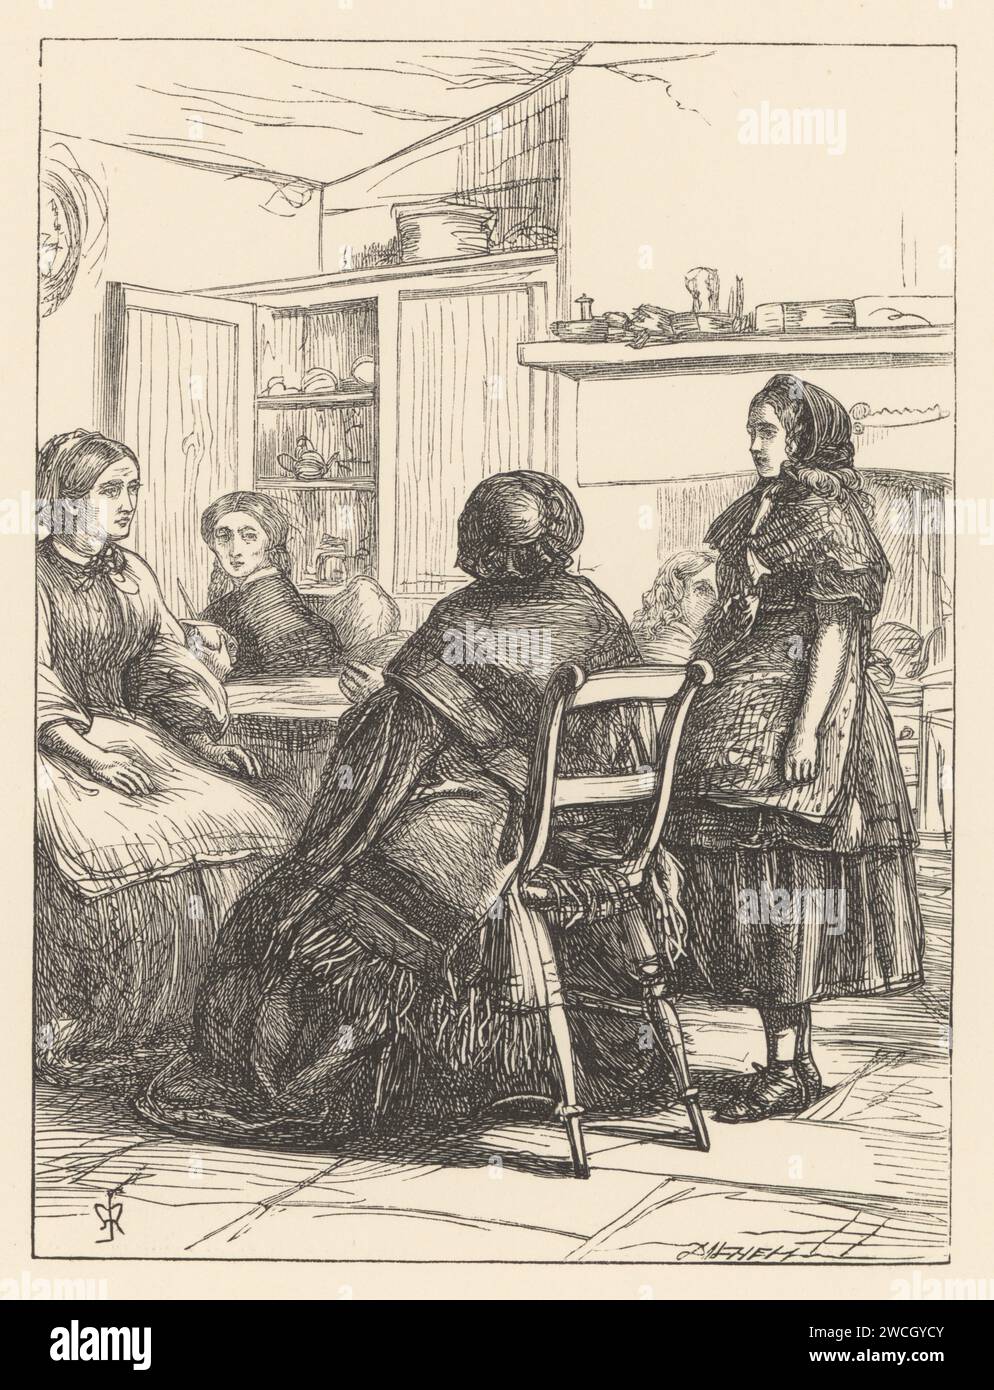 A young girl housemaid stands in the kitchen of her first employment, with a Victorian lady, cook, and other servants. Elizabeth Hand’s First Place, from Good Words. Woodcut by the Dalziel brothers after an illustration by Pre-Raphaelite artist John Everett Millais from Millais’ Illustrations, a Collection of Drawings on Wood, Alexander Strahan, London, 1866. Stock Photo